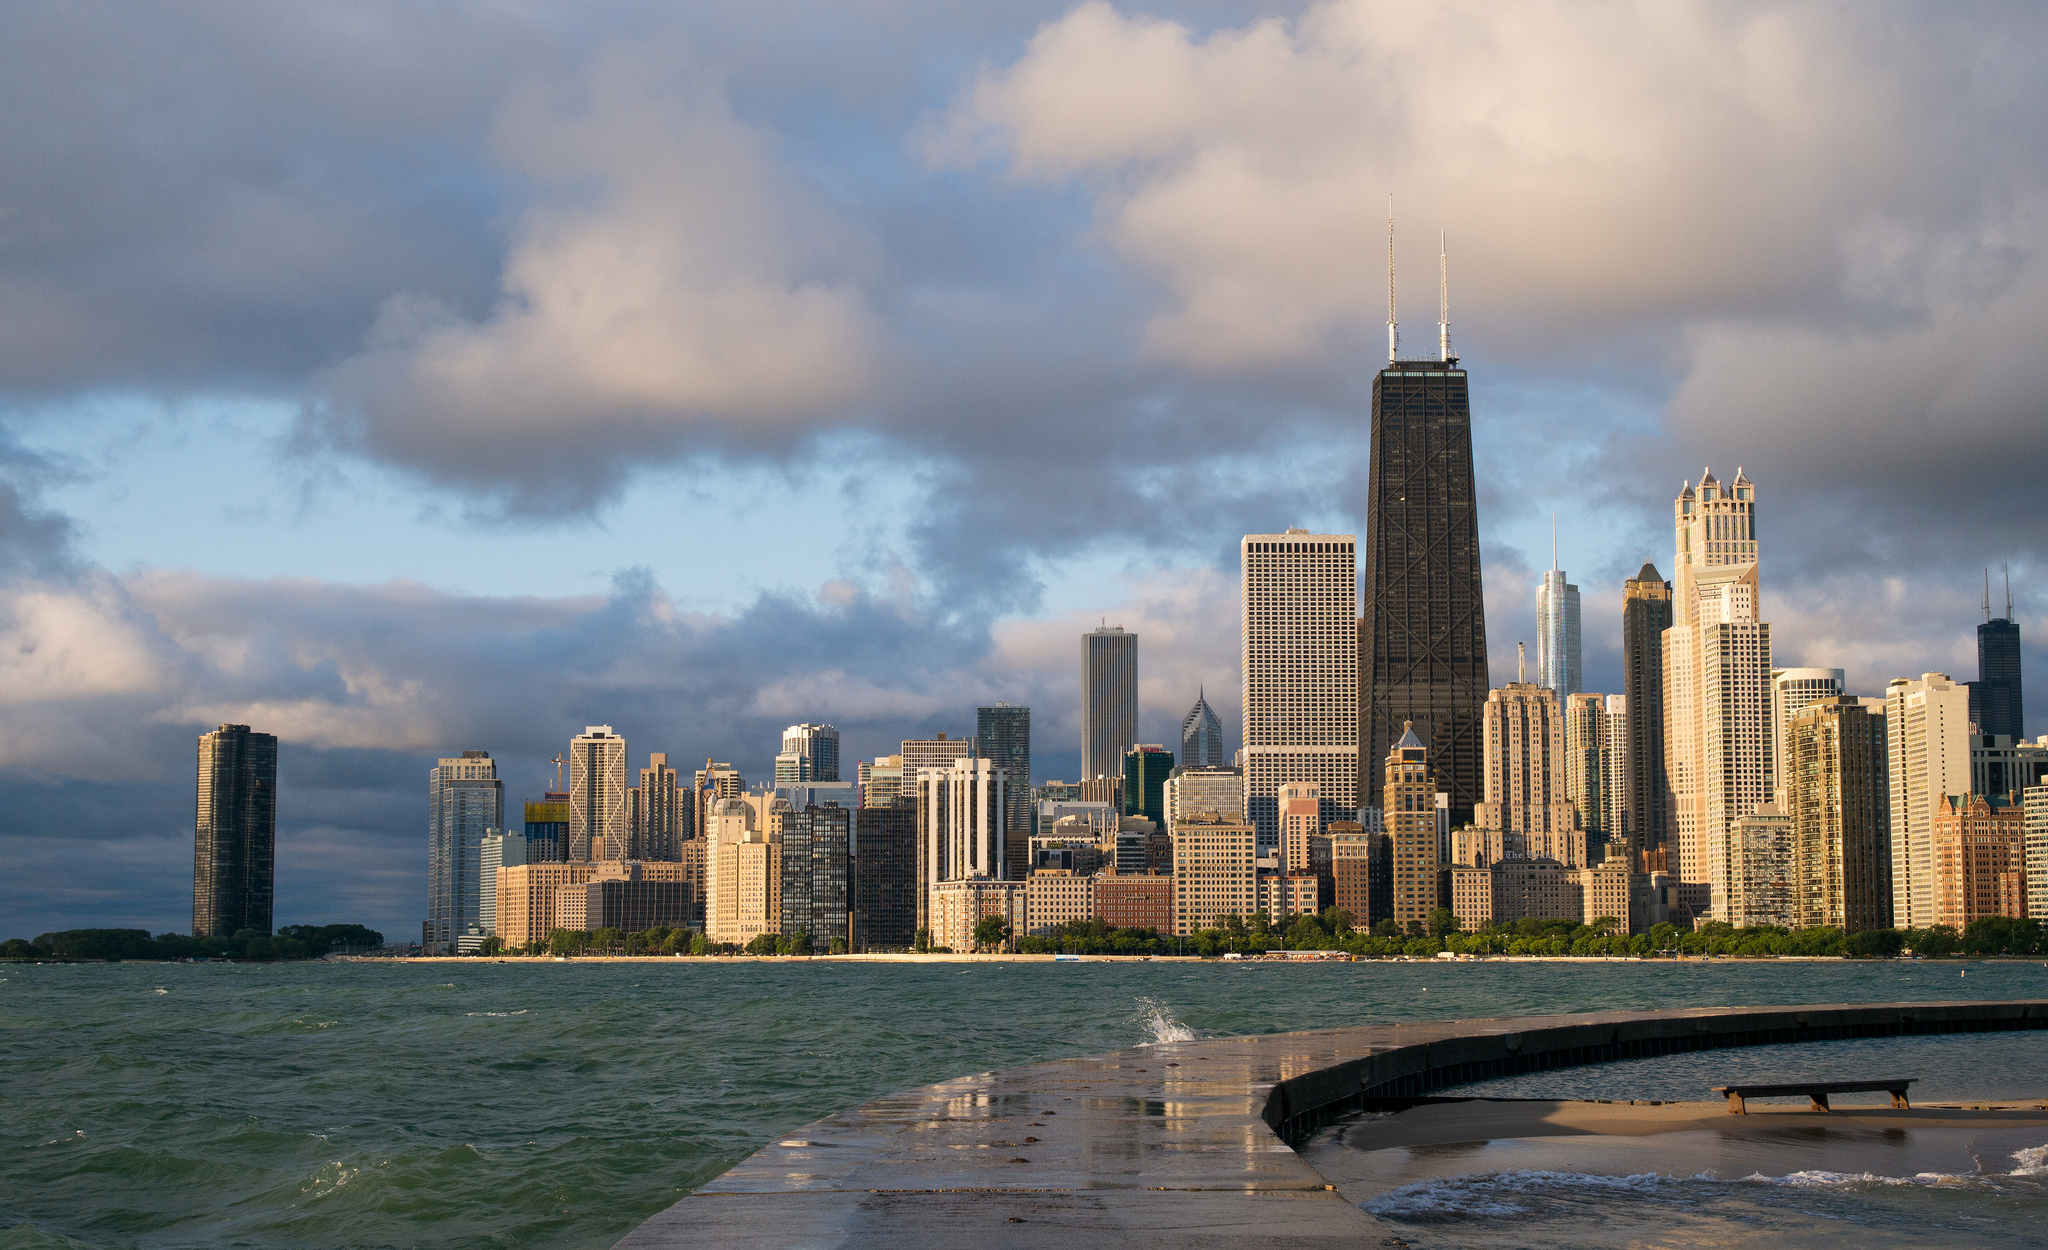 InfraRed will supply funding for the new company, which will be headquartered in Chicago. Image: Roman Boed / Flickr